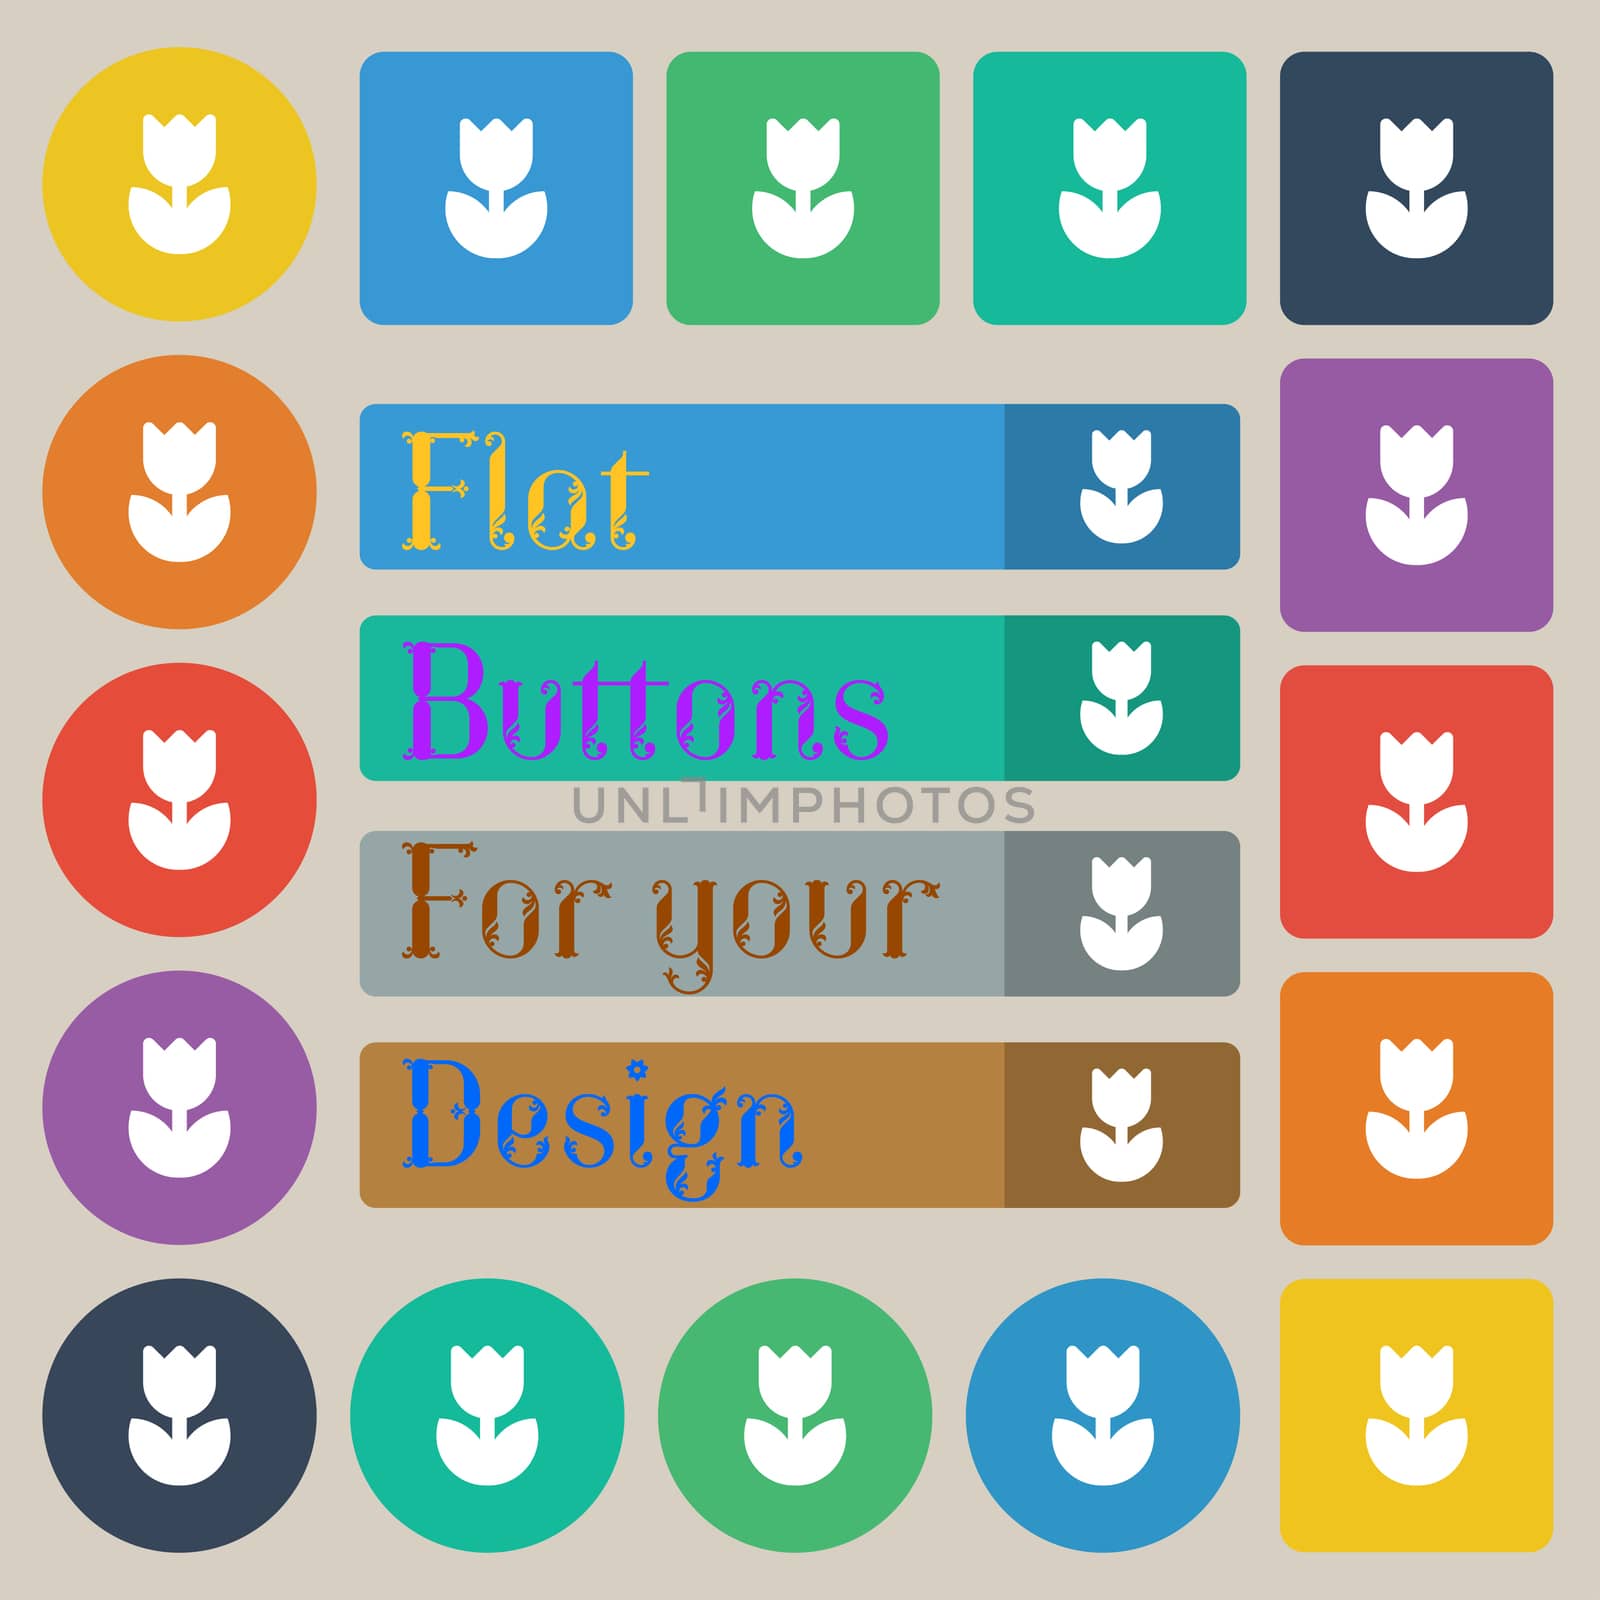 Flower, rose icon sign. Set of twenty colored flat, round, square and rectangular buttons. illustration